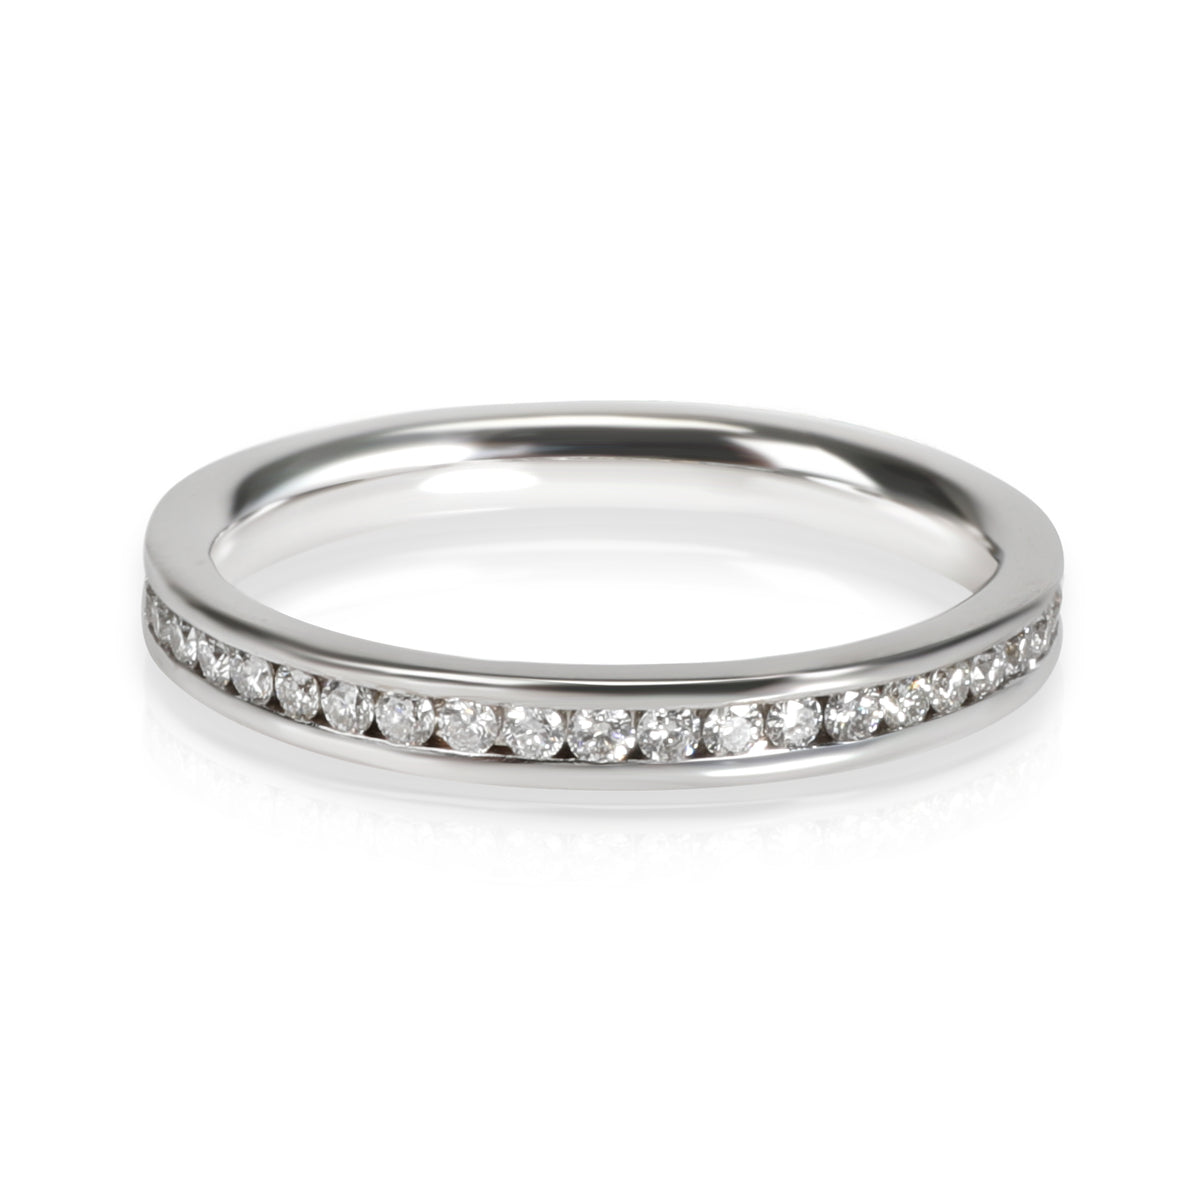 Channel Set Diamond Eternity Band in 18K White Gold 0.38 CTW